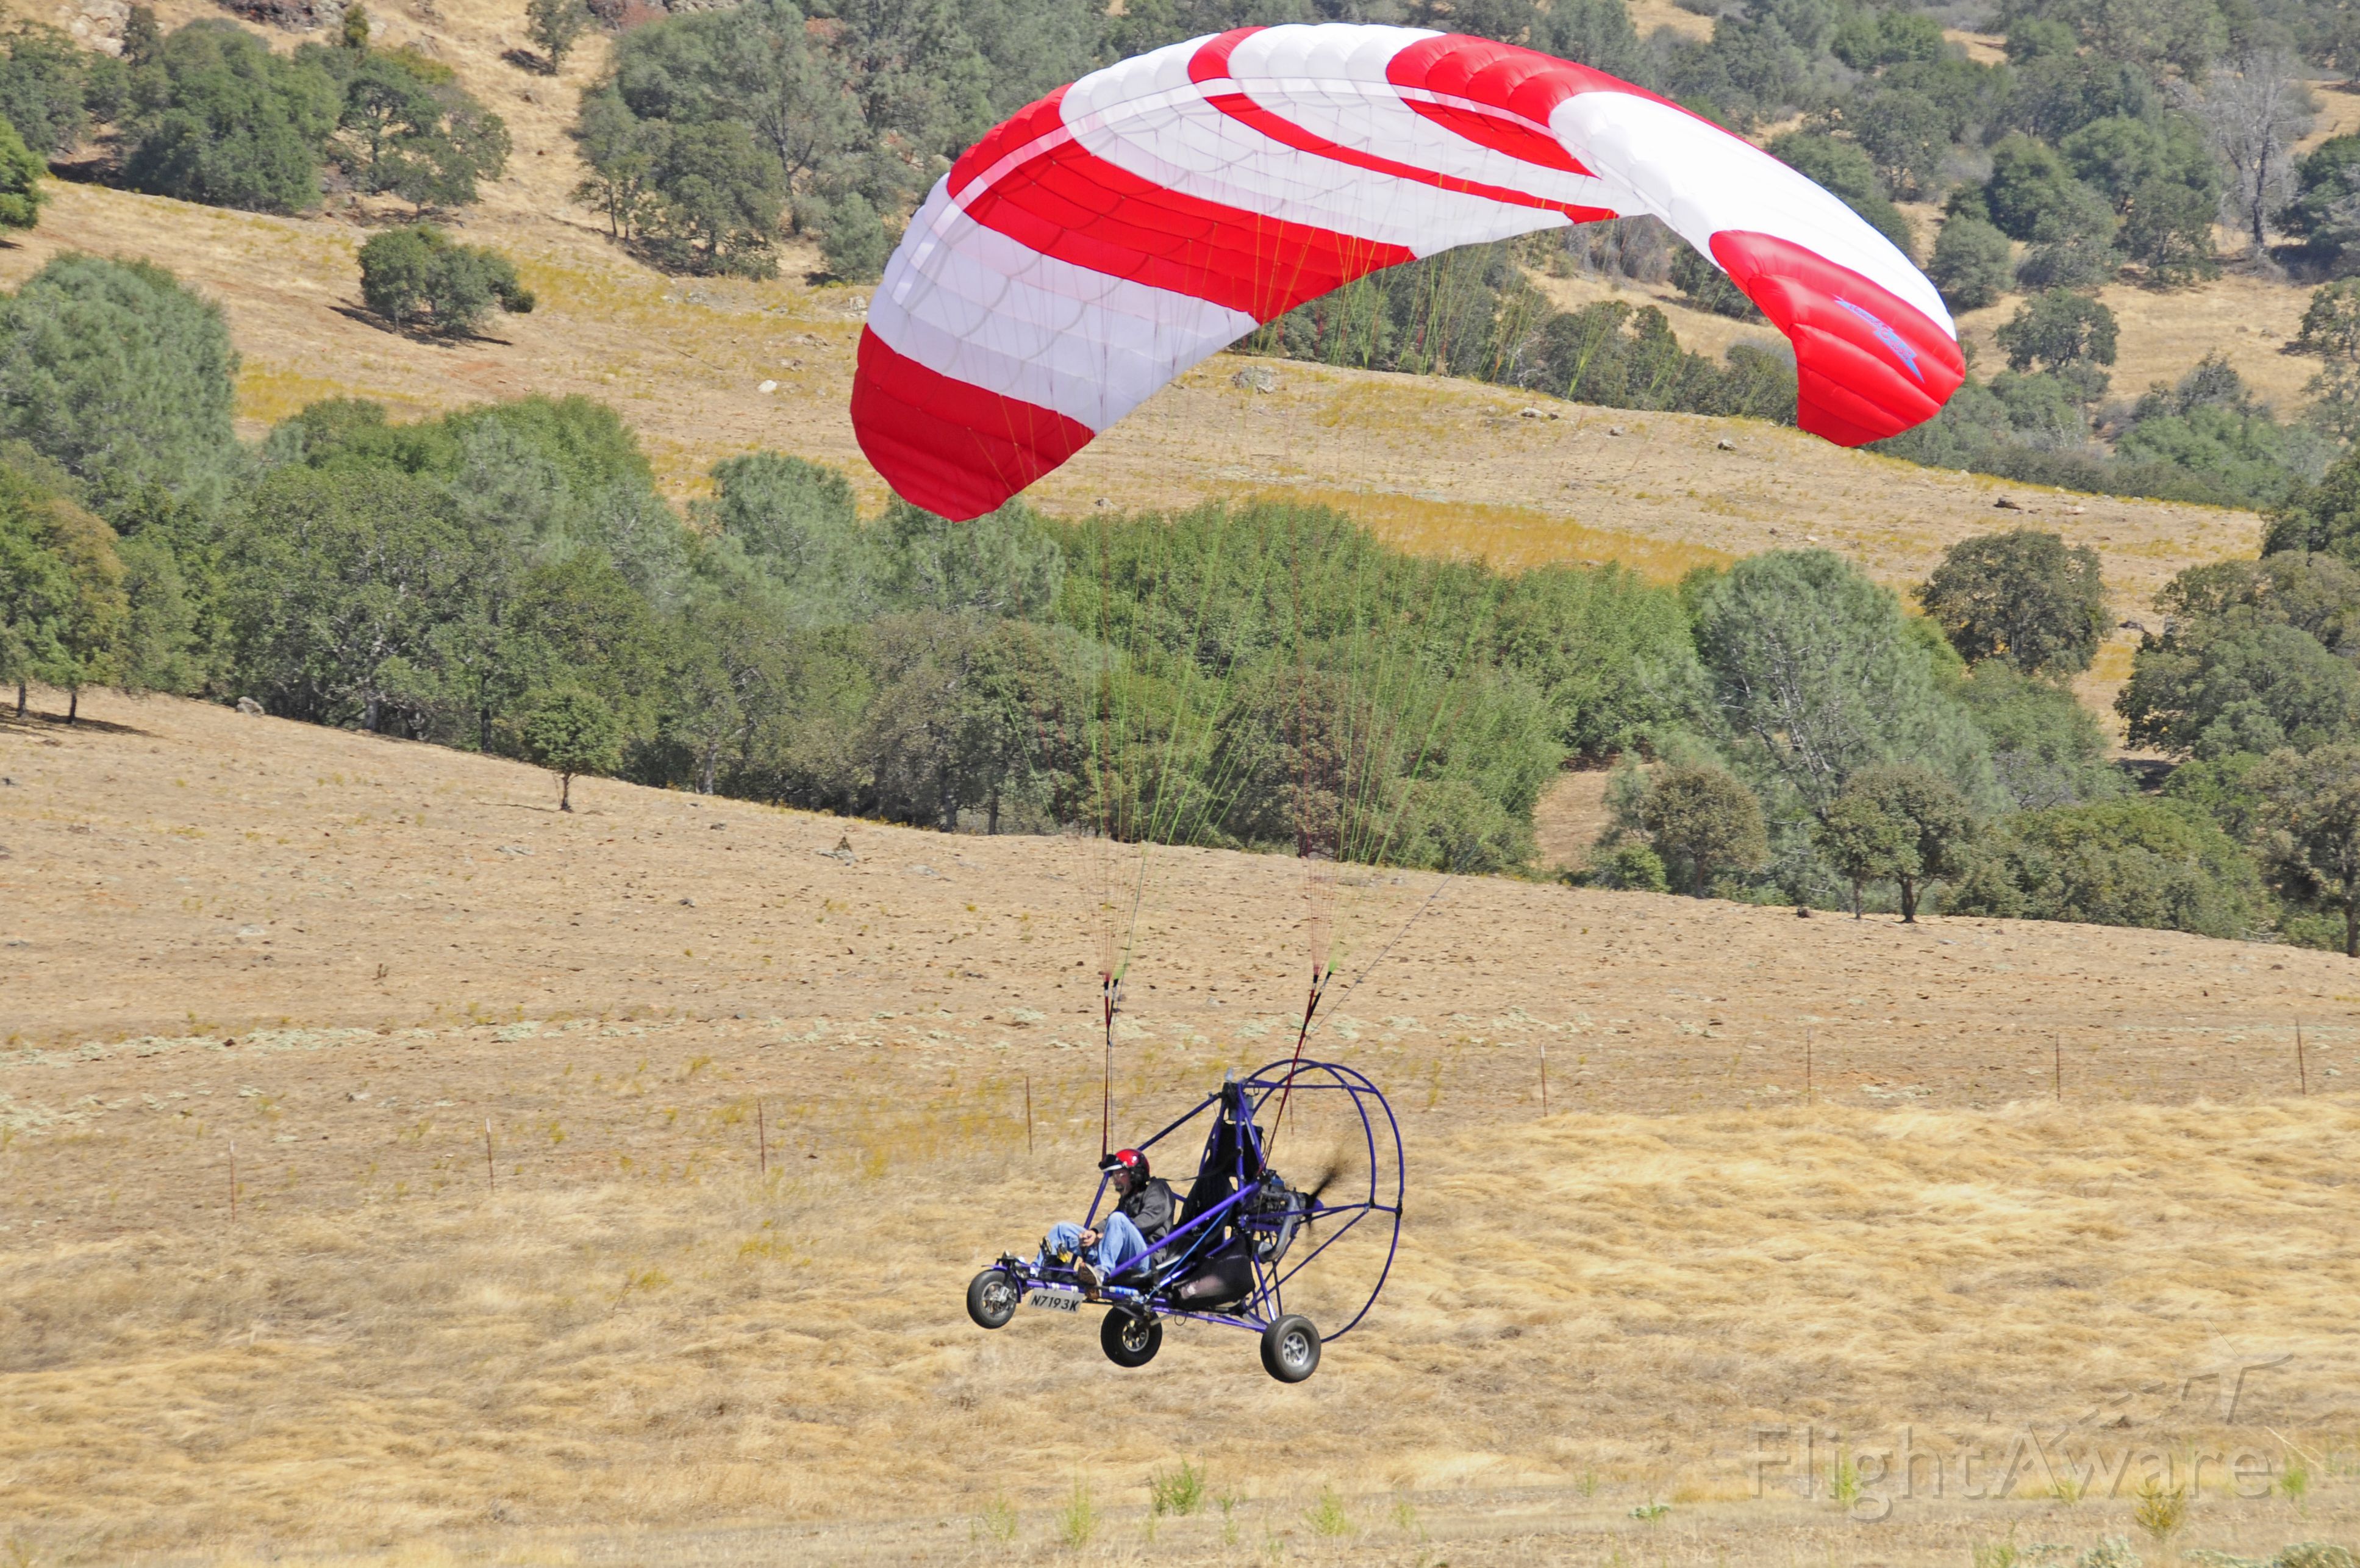 N7193K — - N7193K A Powered Parachute at Mariposa Airports 2011 Fly-In